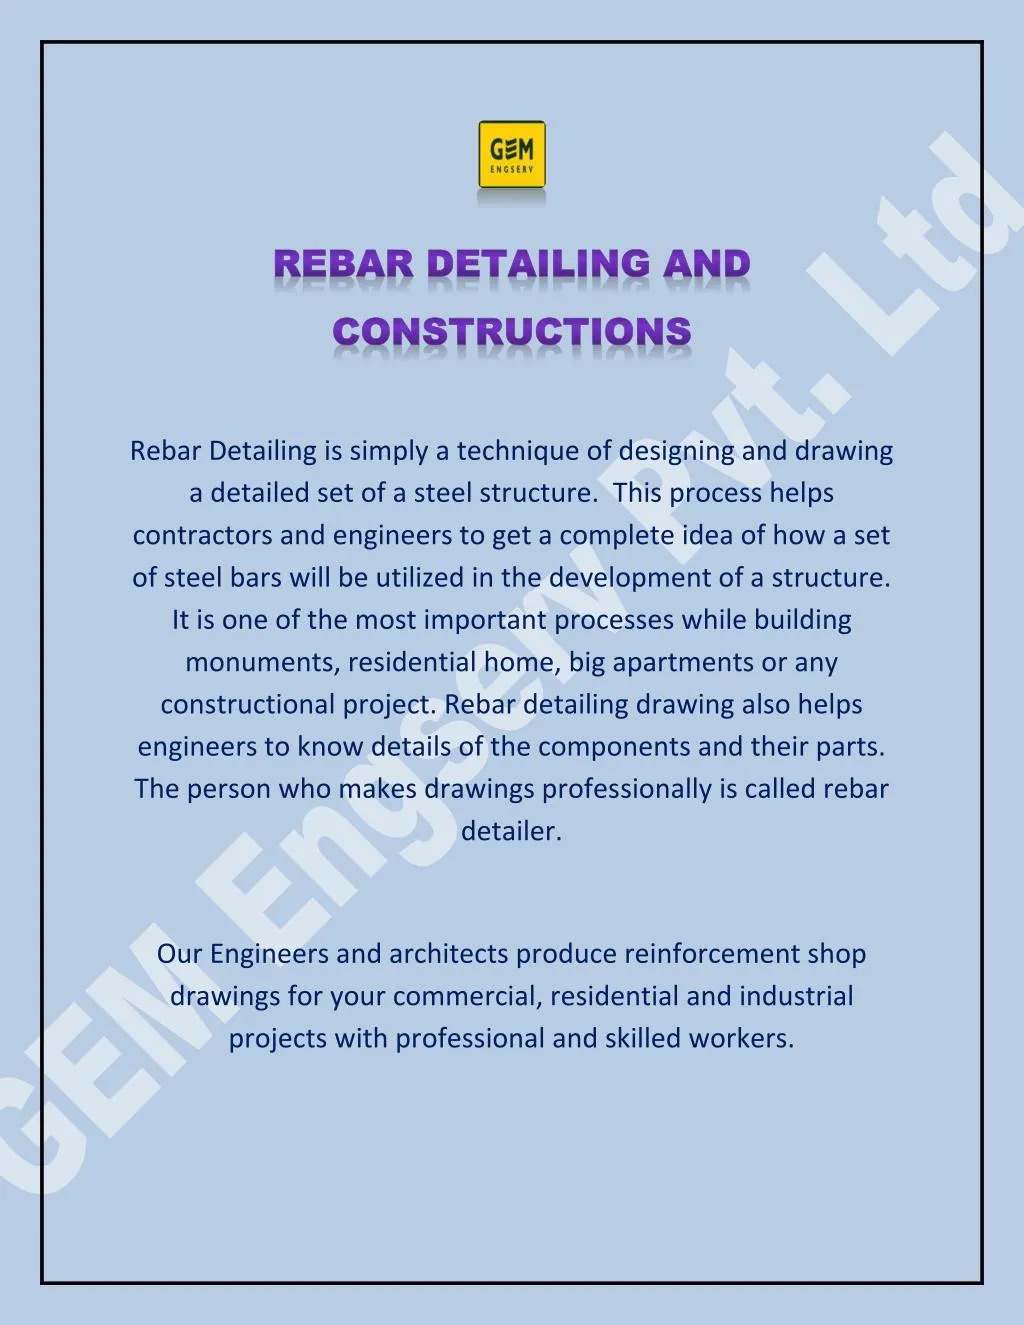 rebar detailing is simply a technique